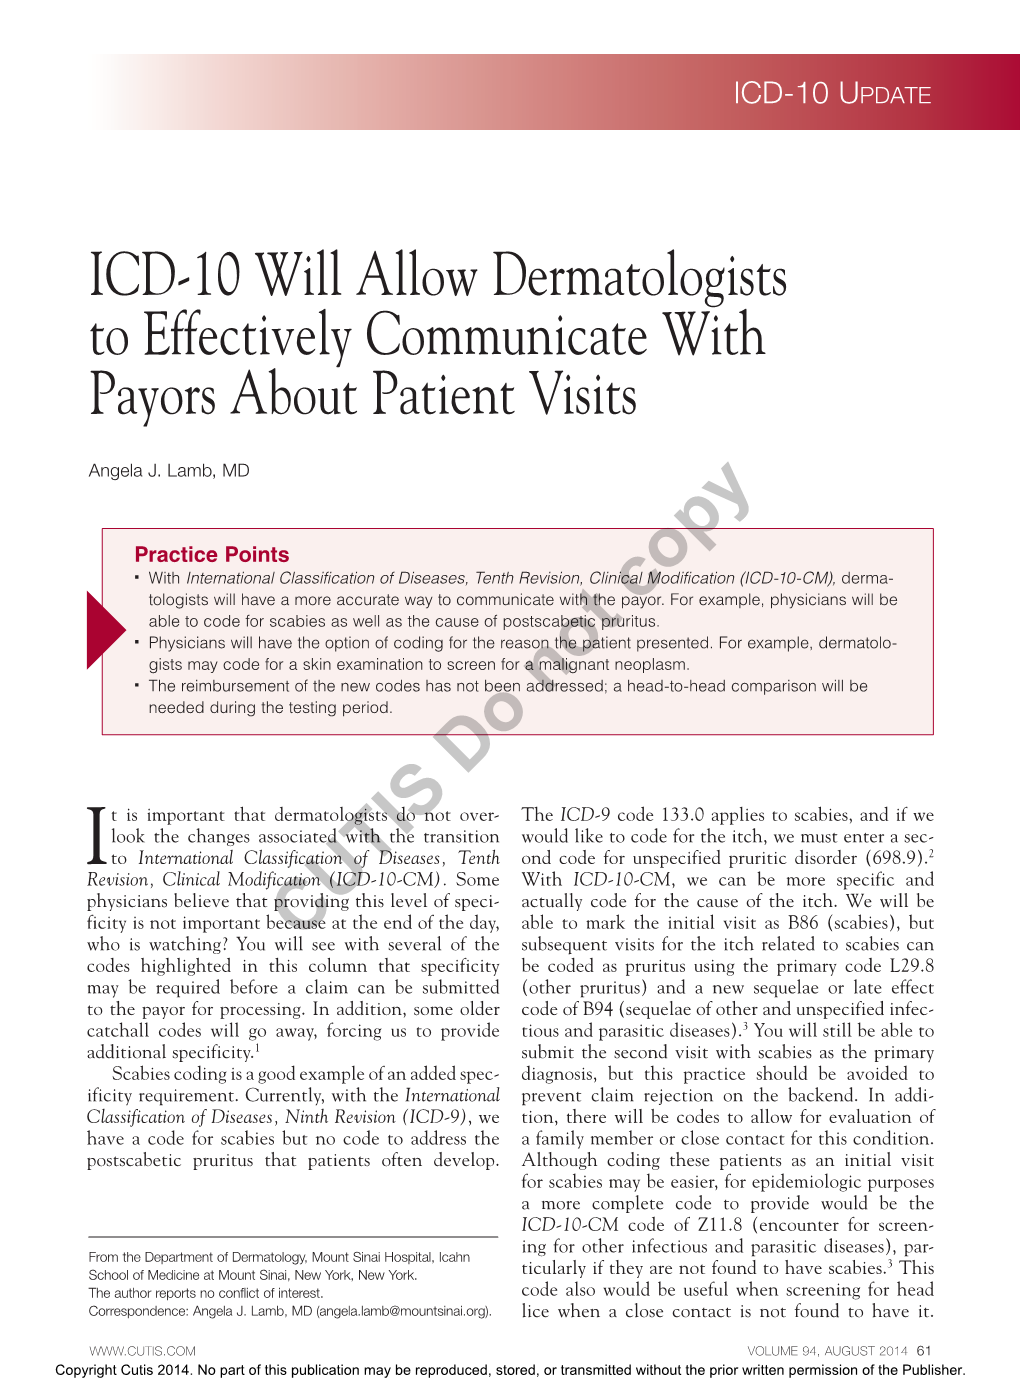 ICD-10 Will Allow Dermatologists to Effectively Communicate with Payors About Patient Visits